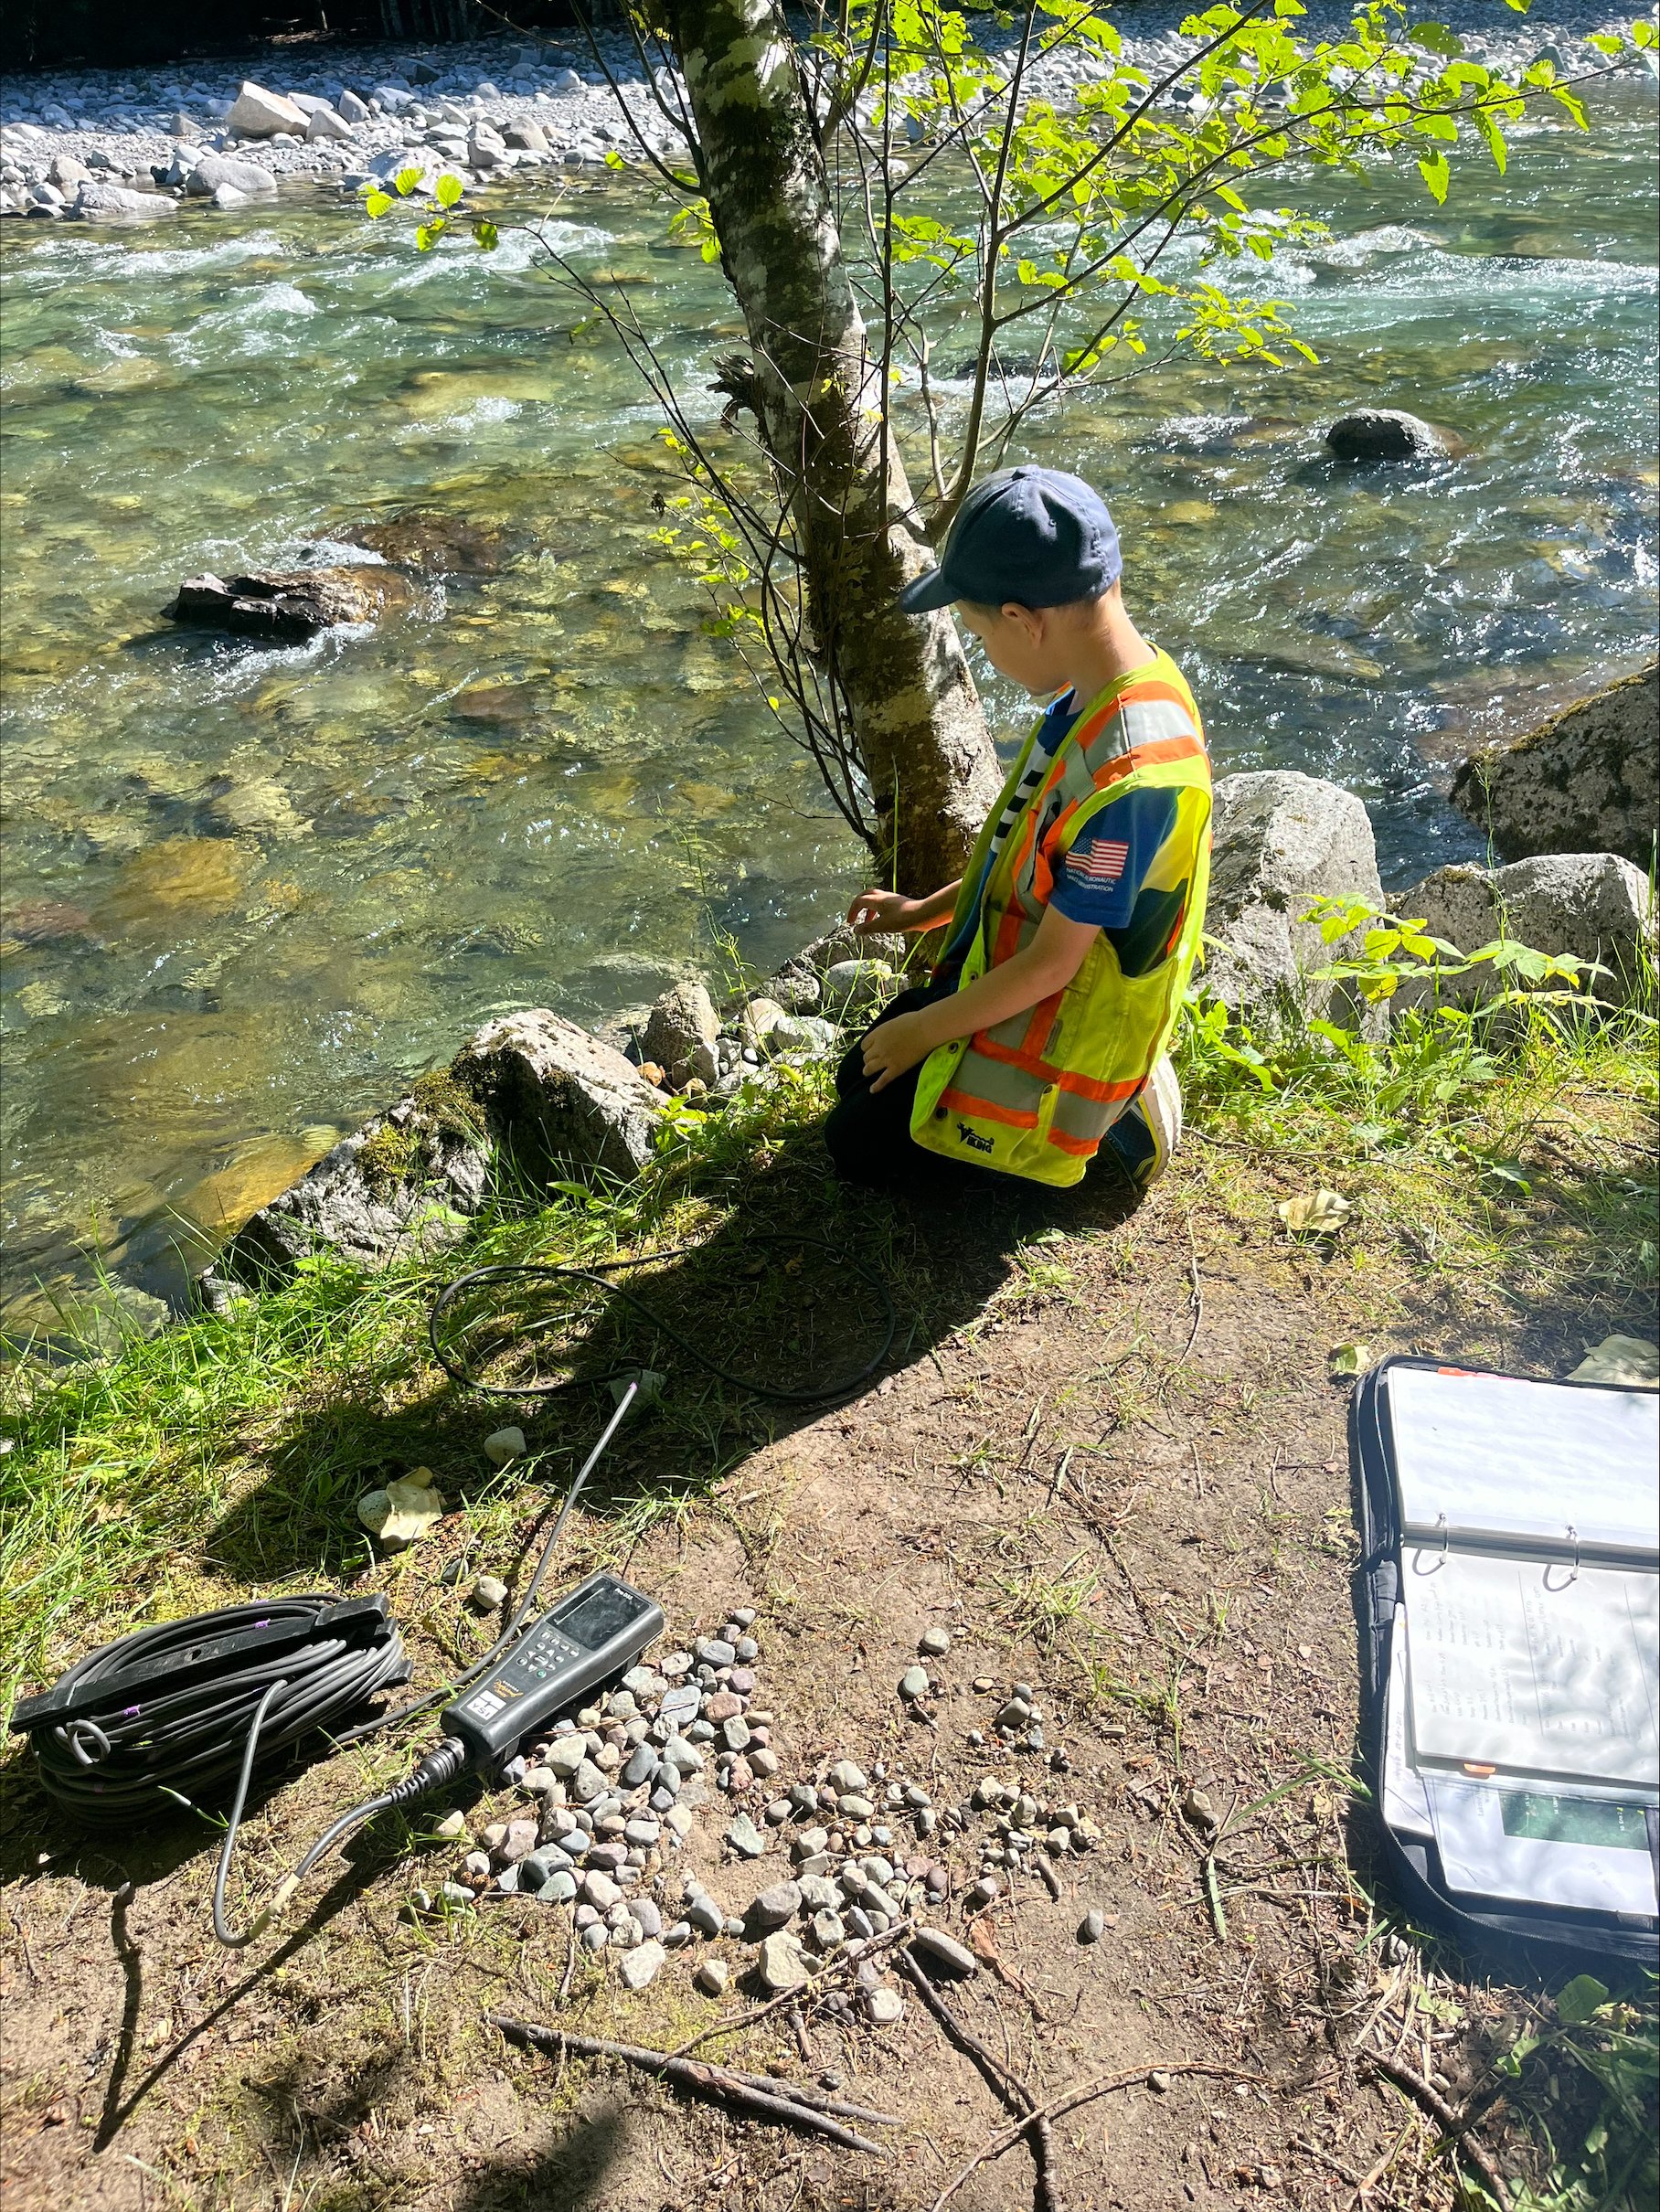 Helping with the watershed water quality sampling data collection